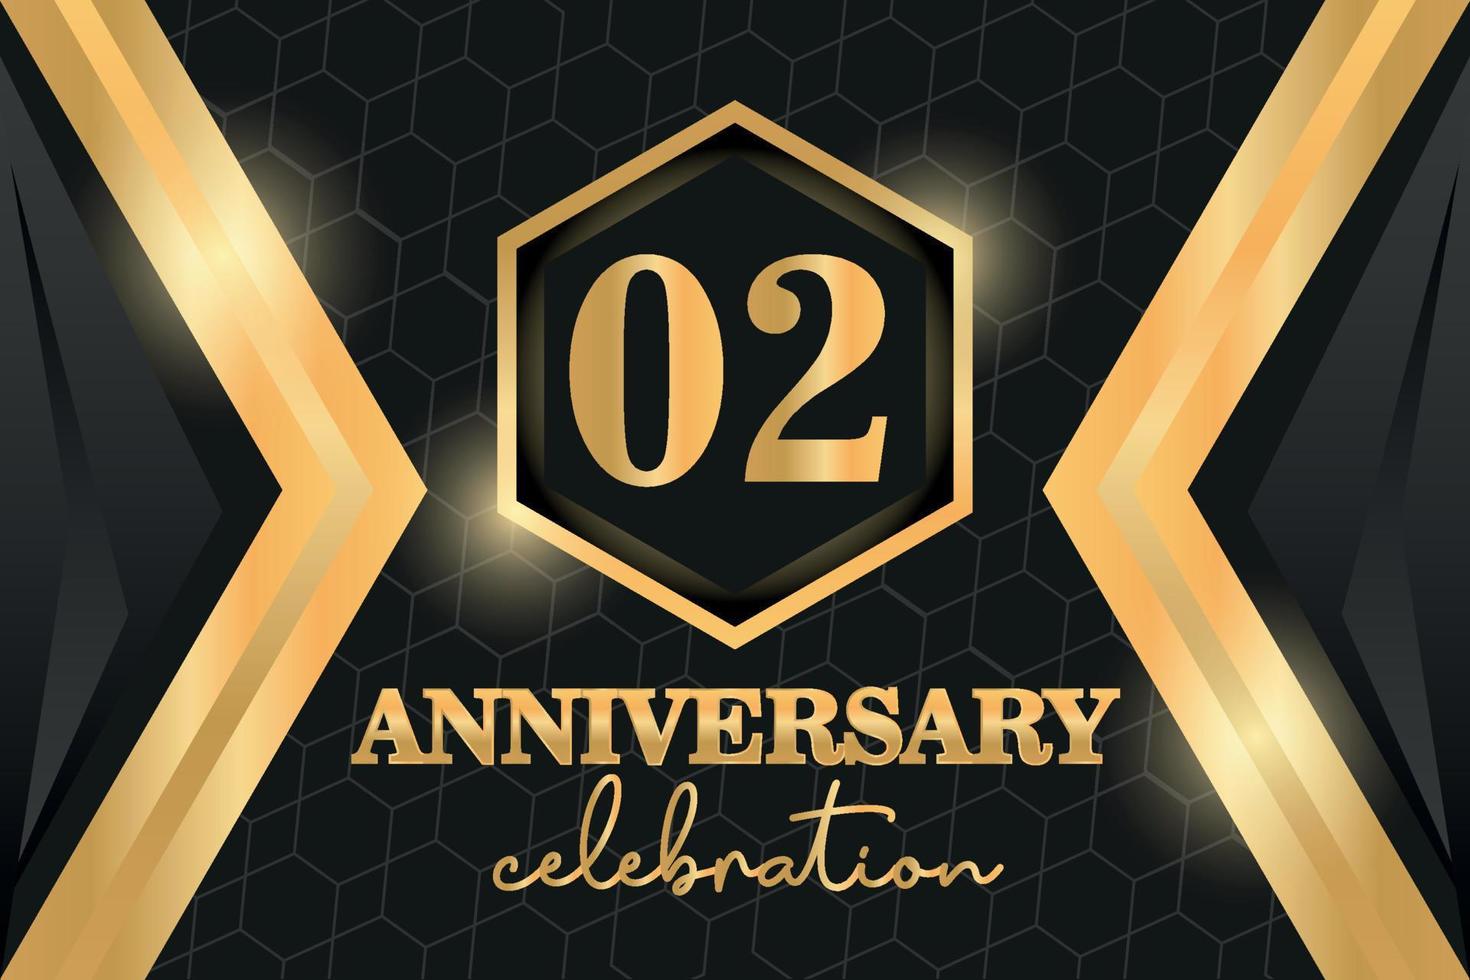 02 Years Anniversary Logo Golden Colored vector design  on black background template for greeting